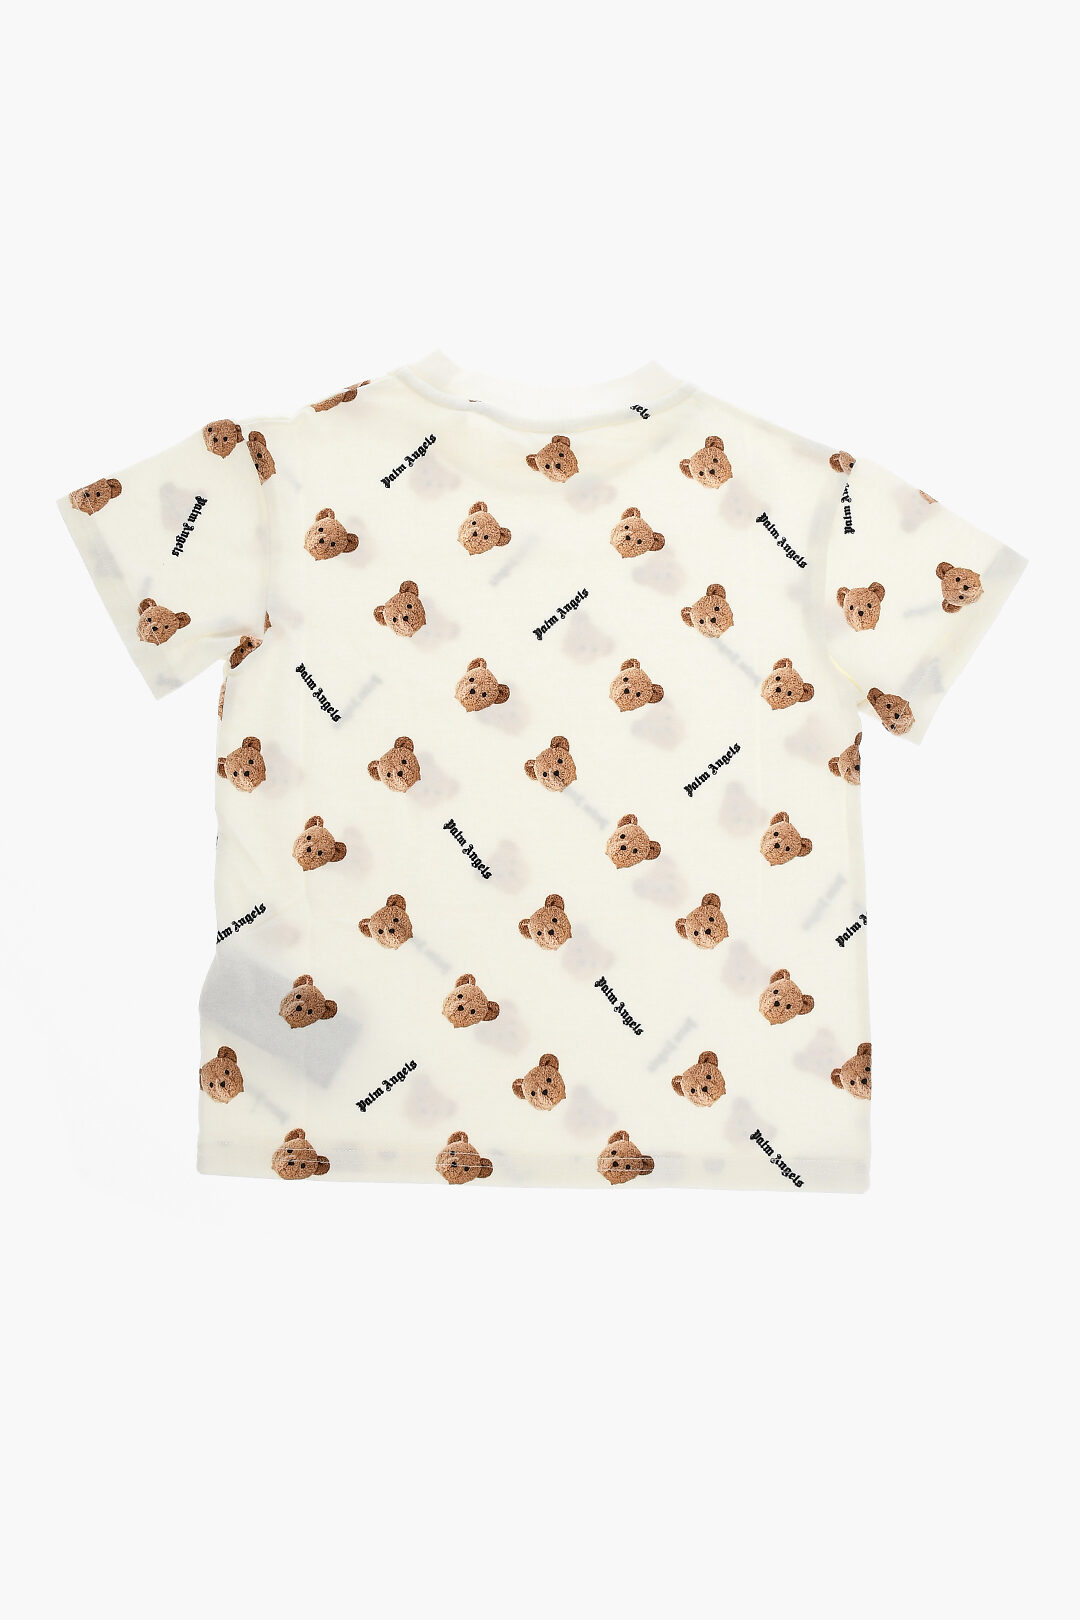 Palm Angels Kids All-Over Teddy Bear Printed Crew-neck T-Shirt